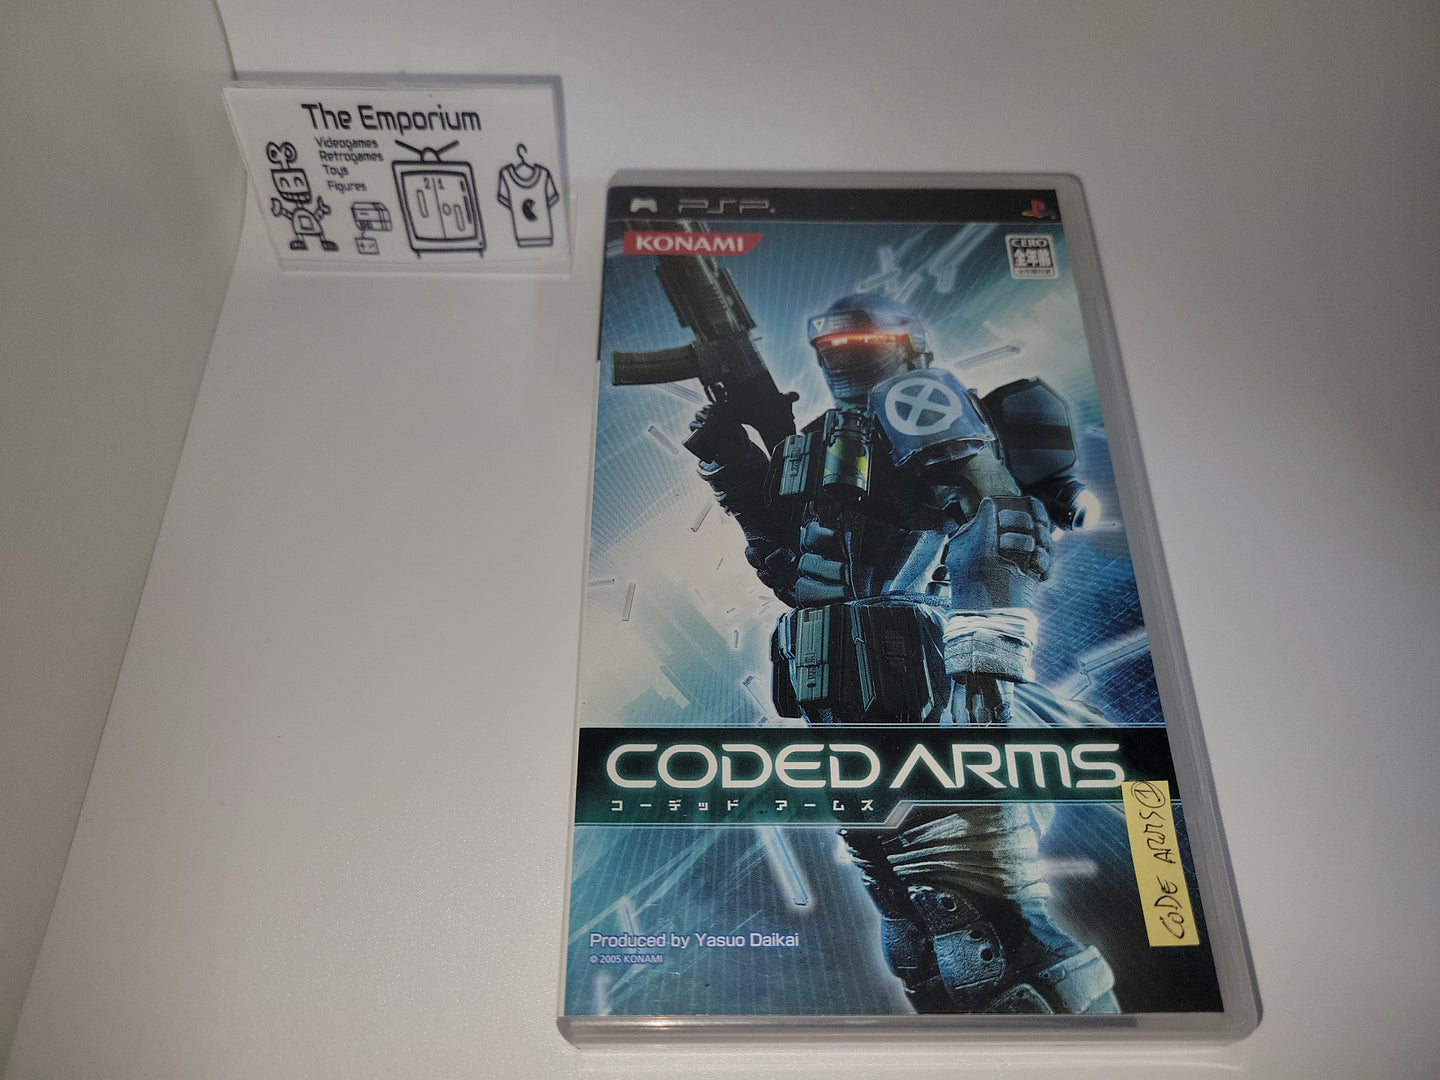 Coded Arms - Sony PSP Playstation Portable